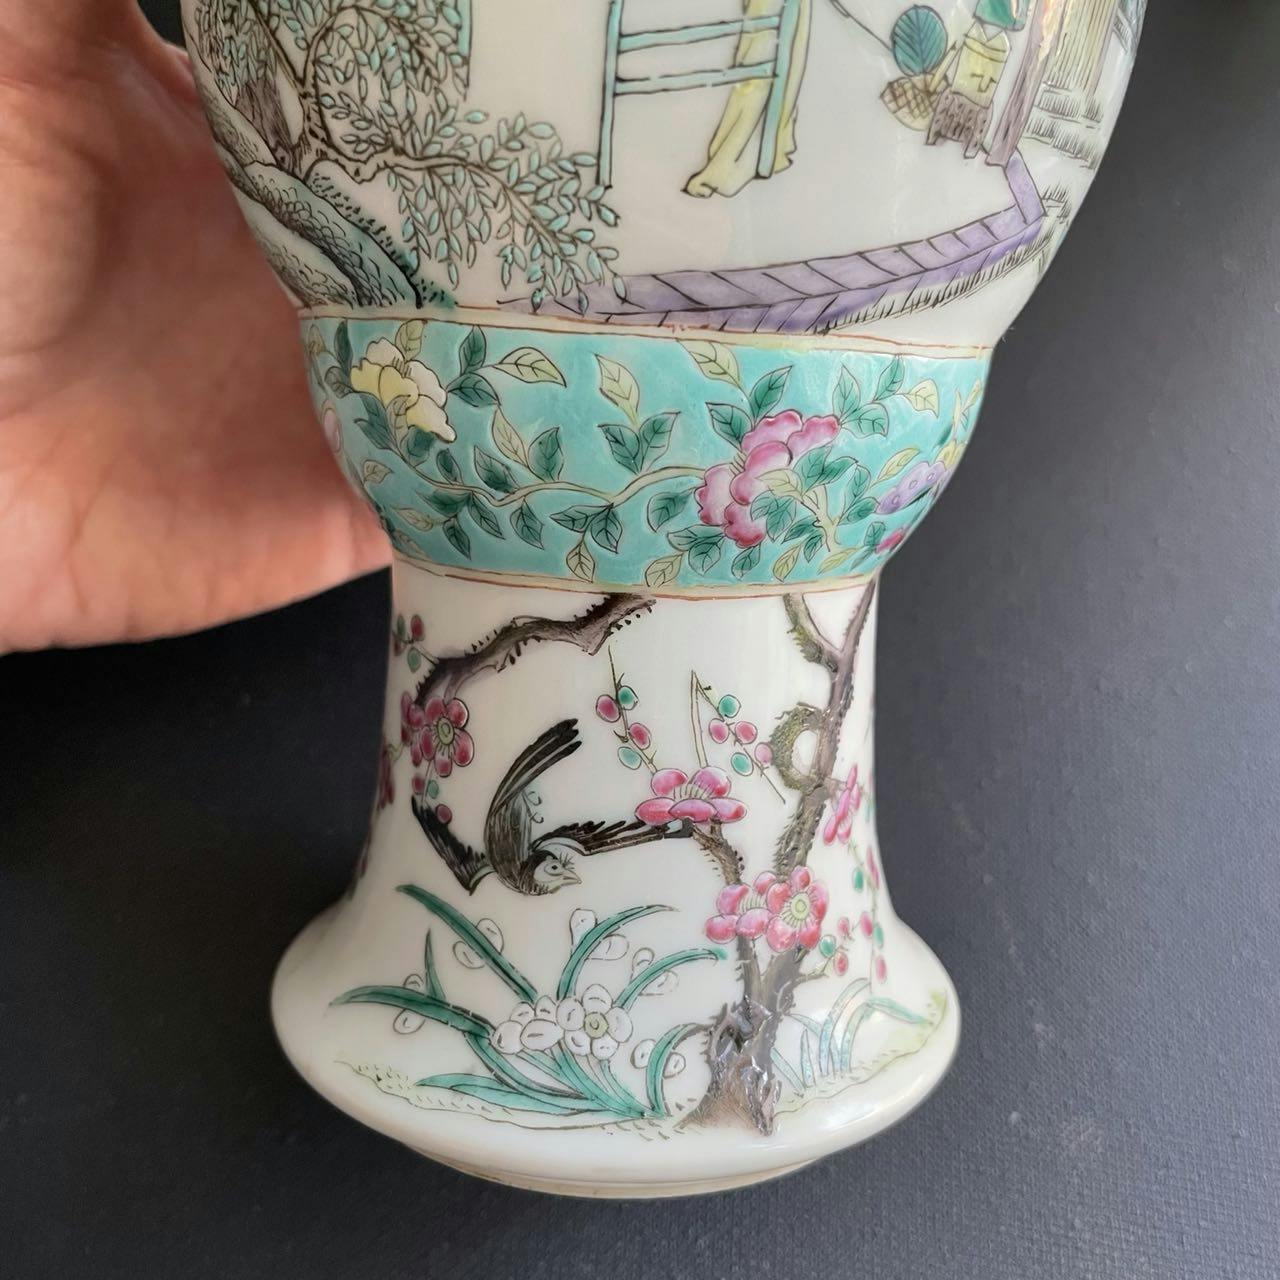 Antique Chinese Porcelain Vase Late Qing, 19th century #1188